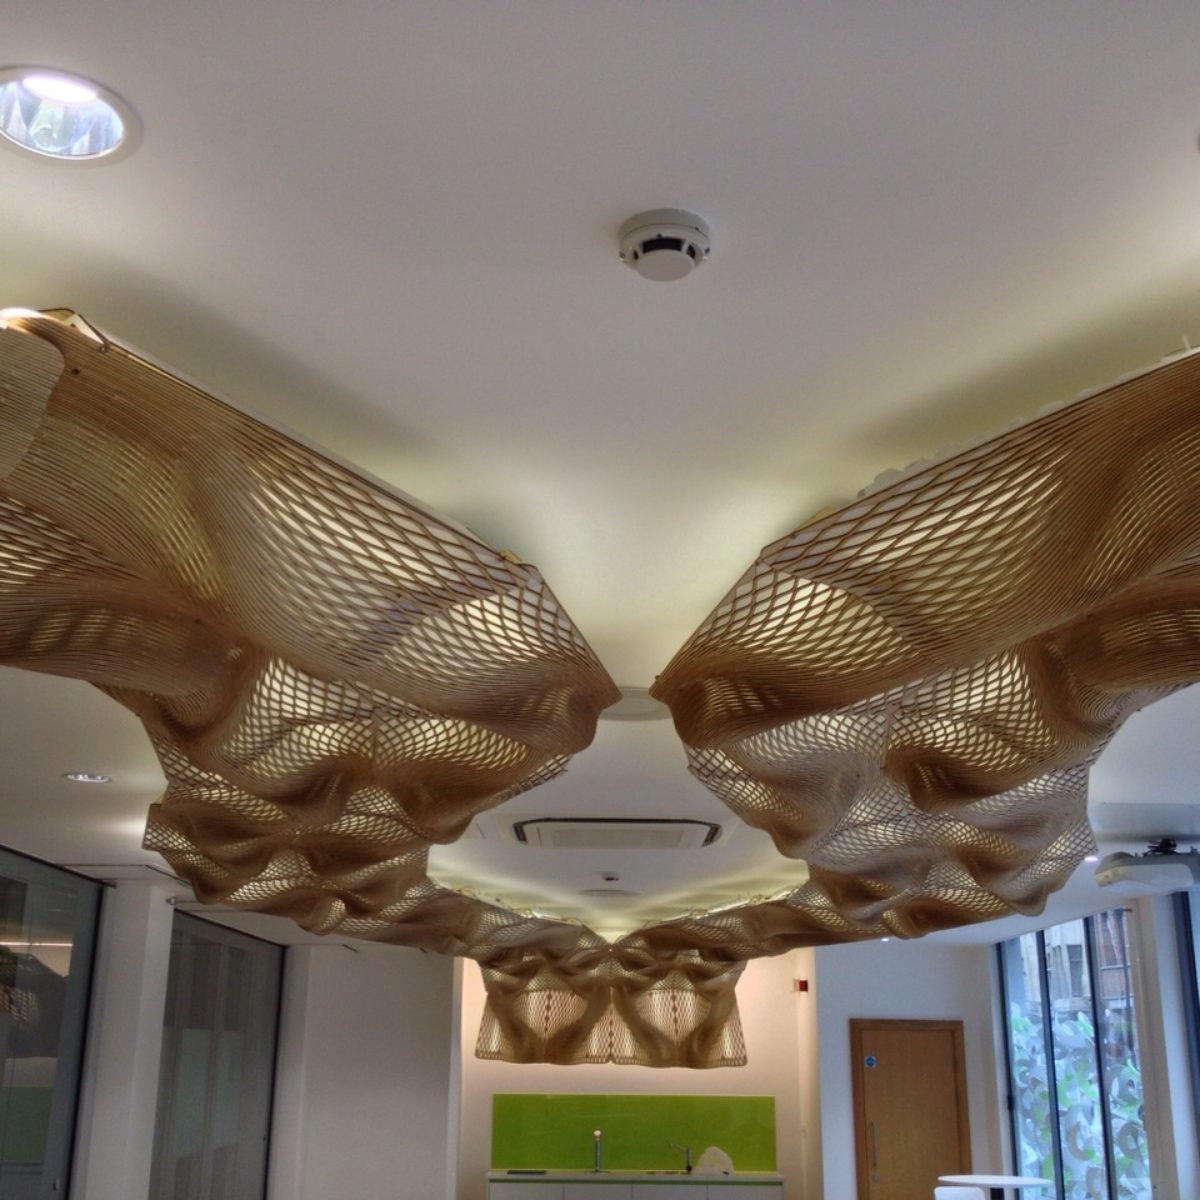 The Wooden Waves - Buro Happold - The ceiling Installation at 71 Newman Street - Picture by Bilal Mian ©Mamou-Mani